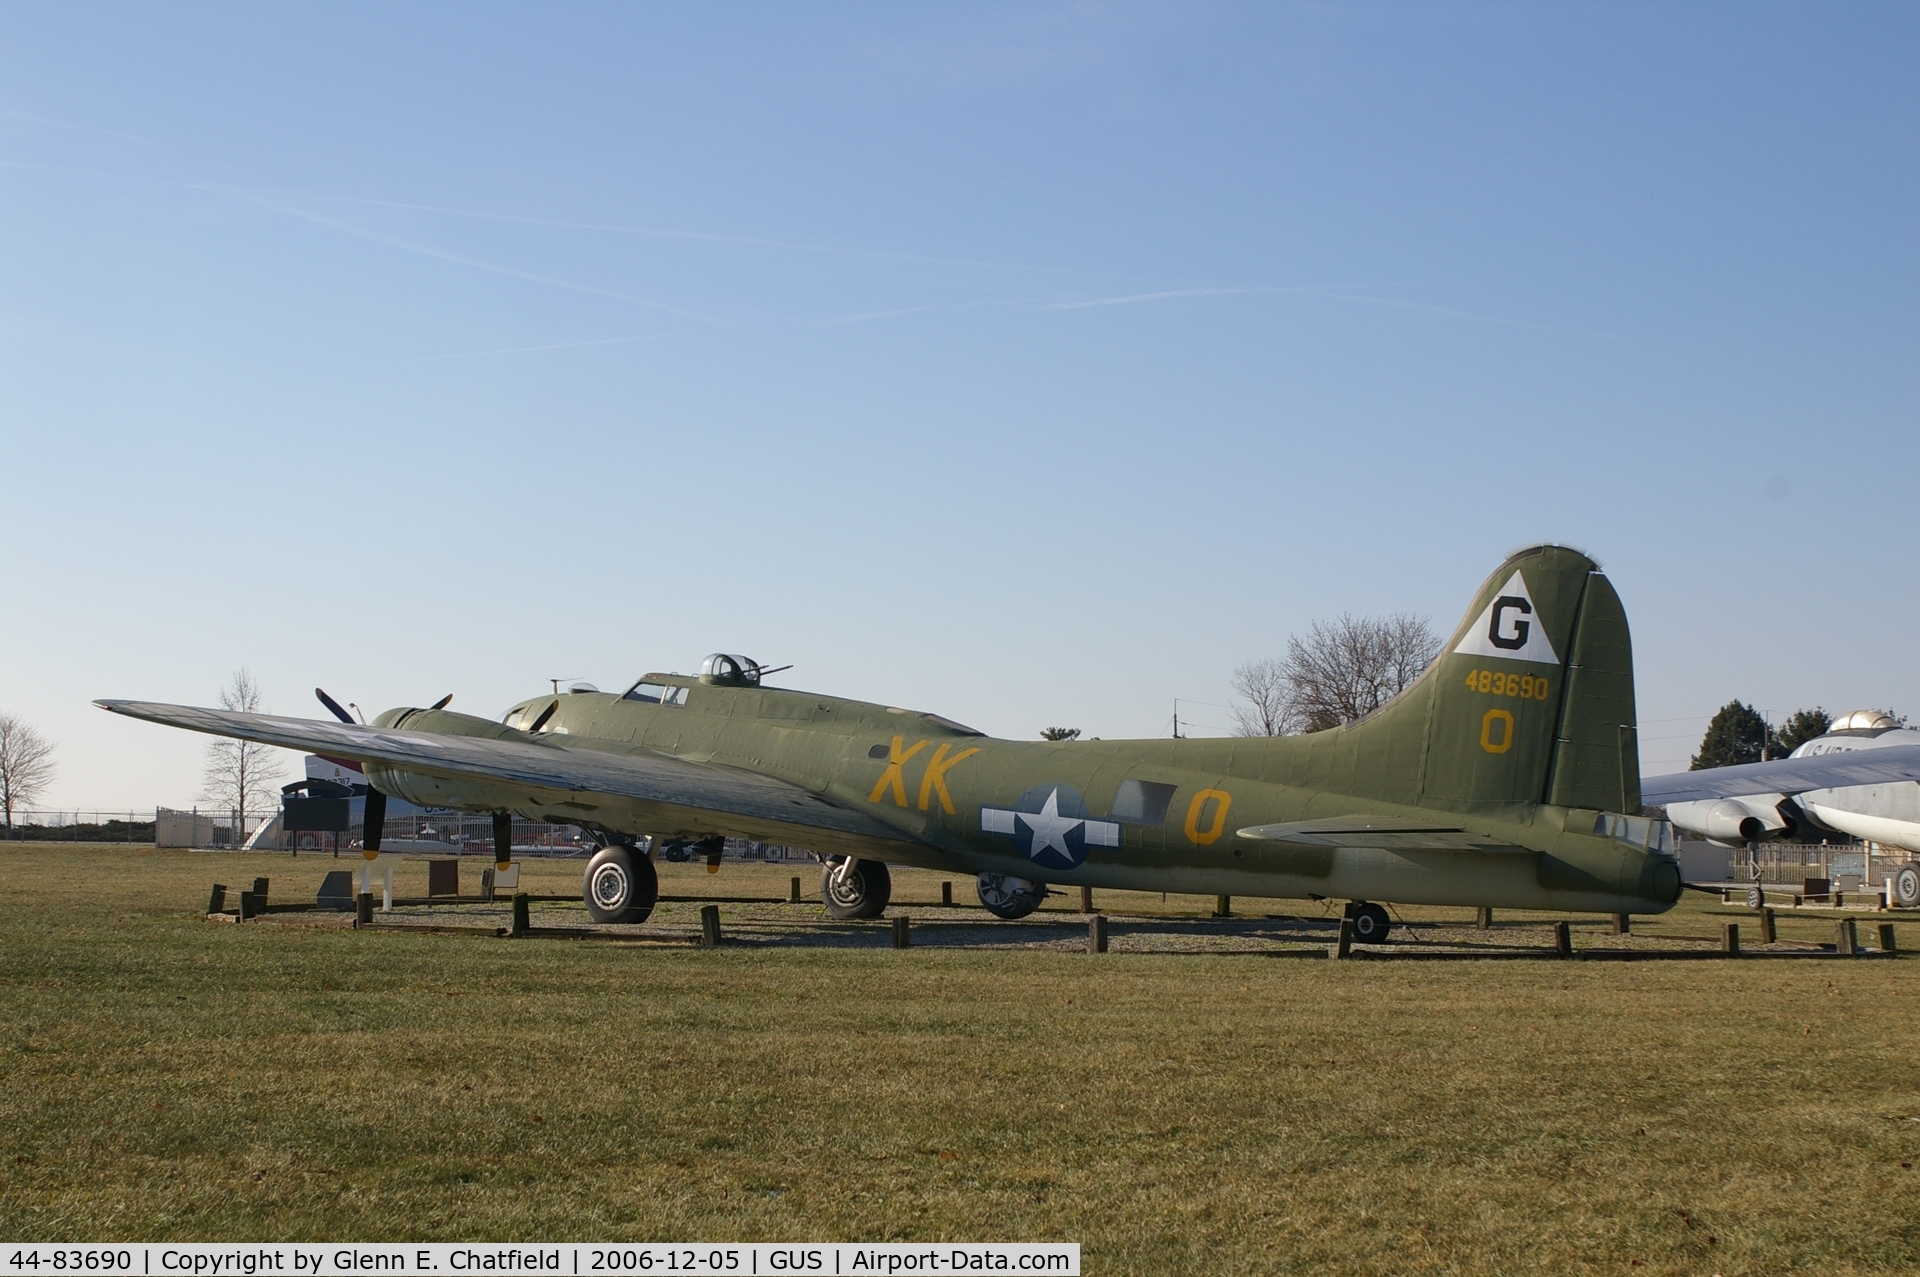 44-83690, 1944 Boeing B-17G-95-DL Flying Fortress C/N 32331, B-17G at Grissom AFB museum